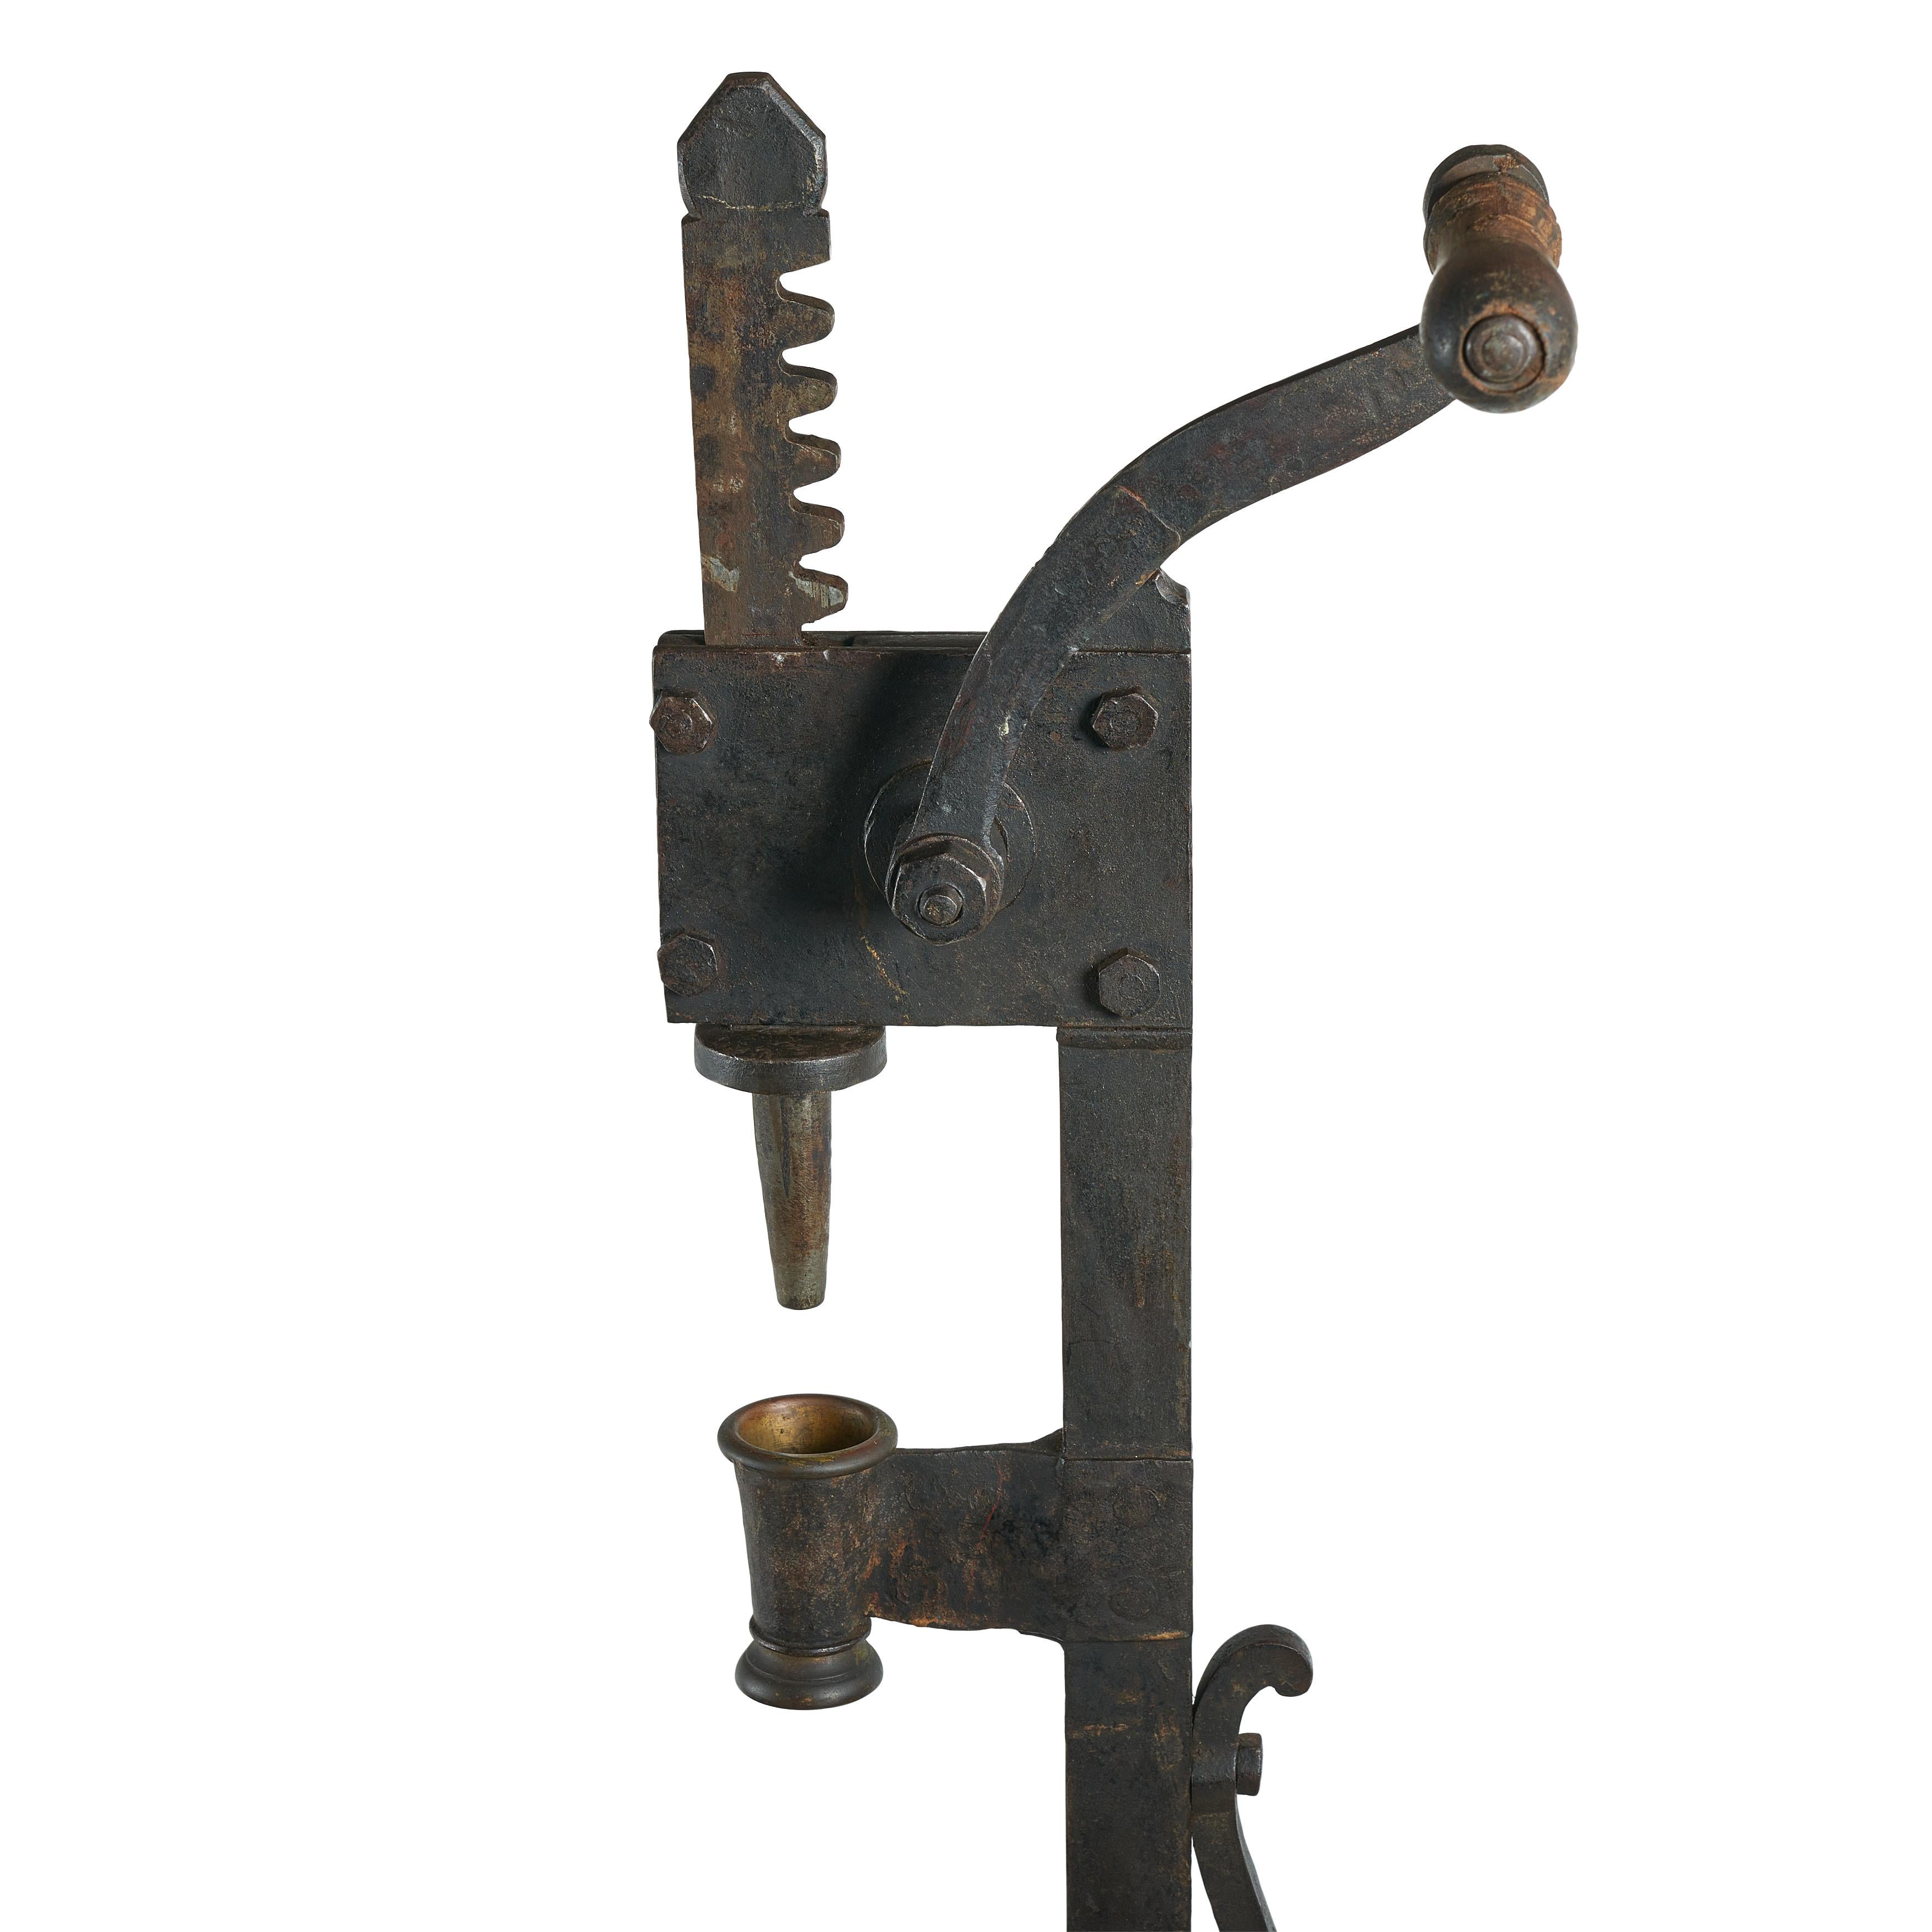 Wrought Iron floor mounted cork press with wood base for wine bottles.